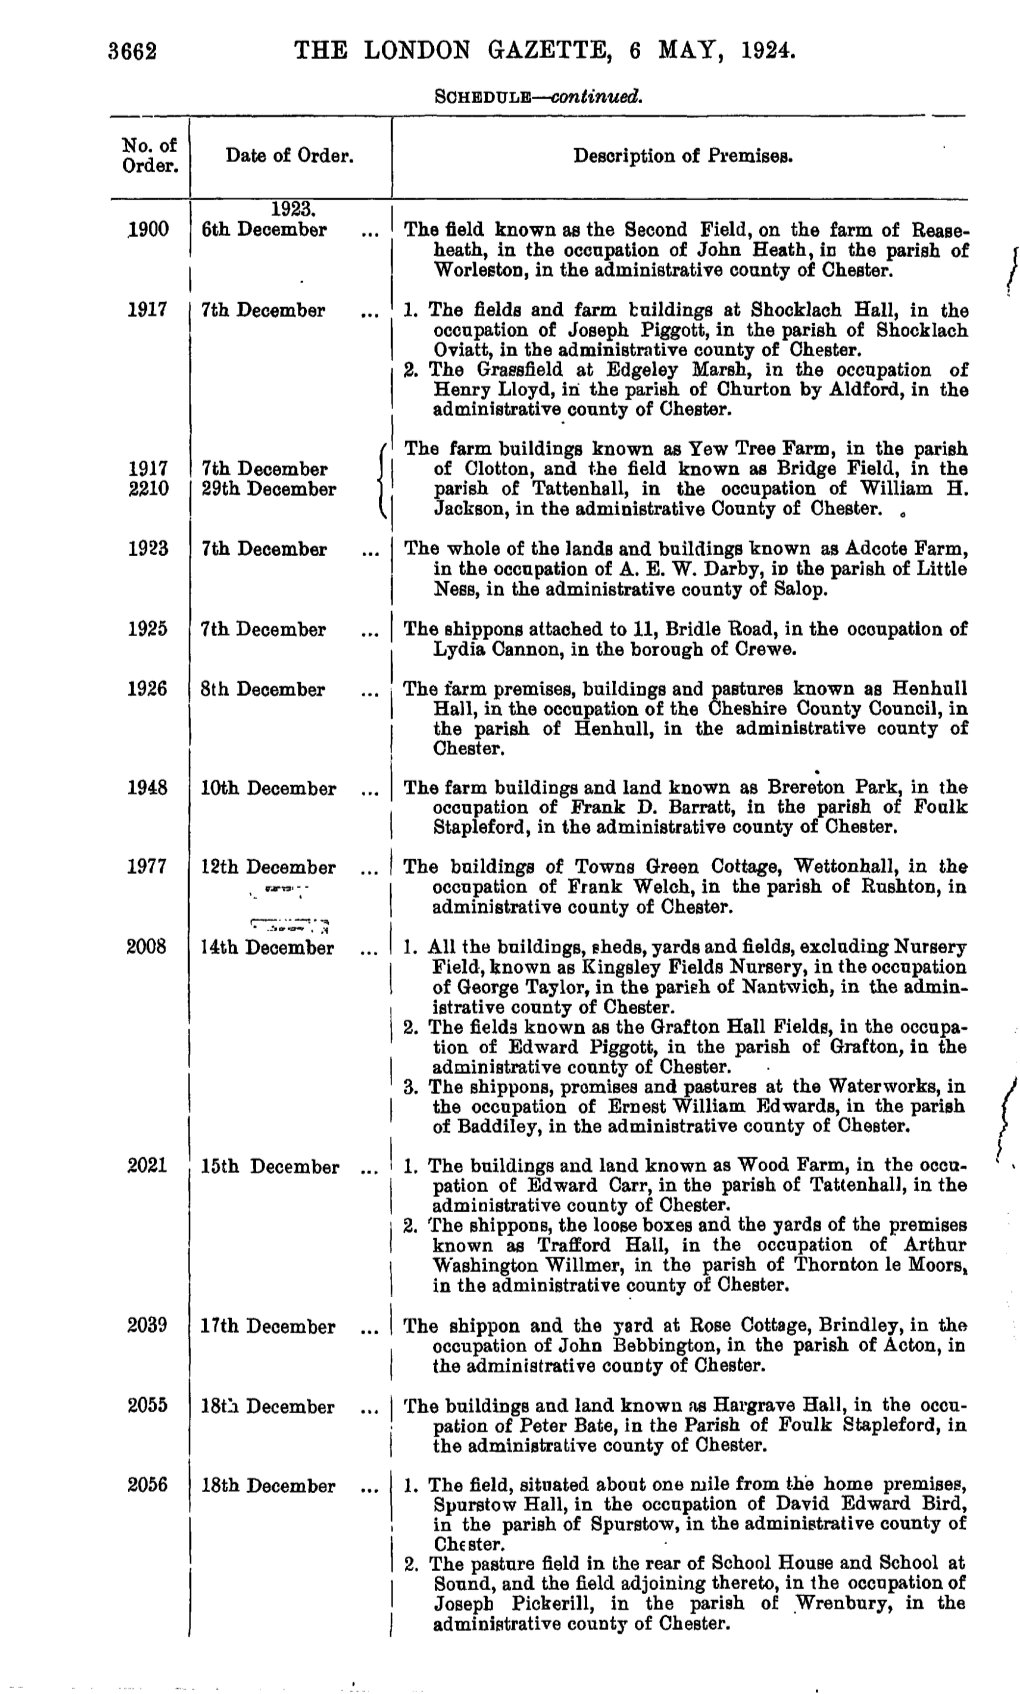 3662 the LONDON GAZETTE, 6 MAY, 1924. SCHEDULE—Continued